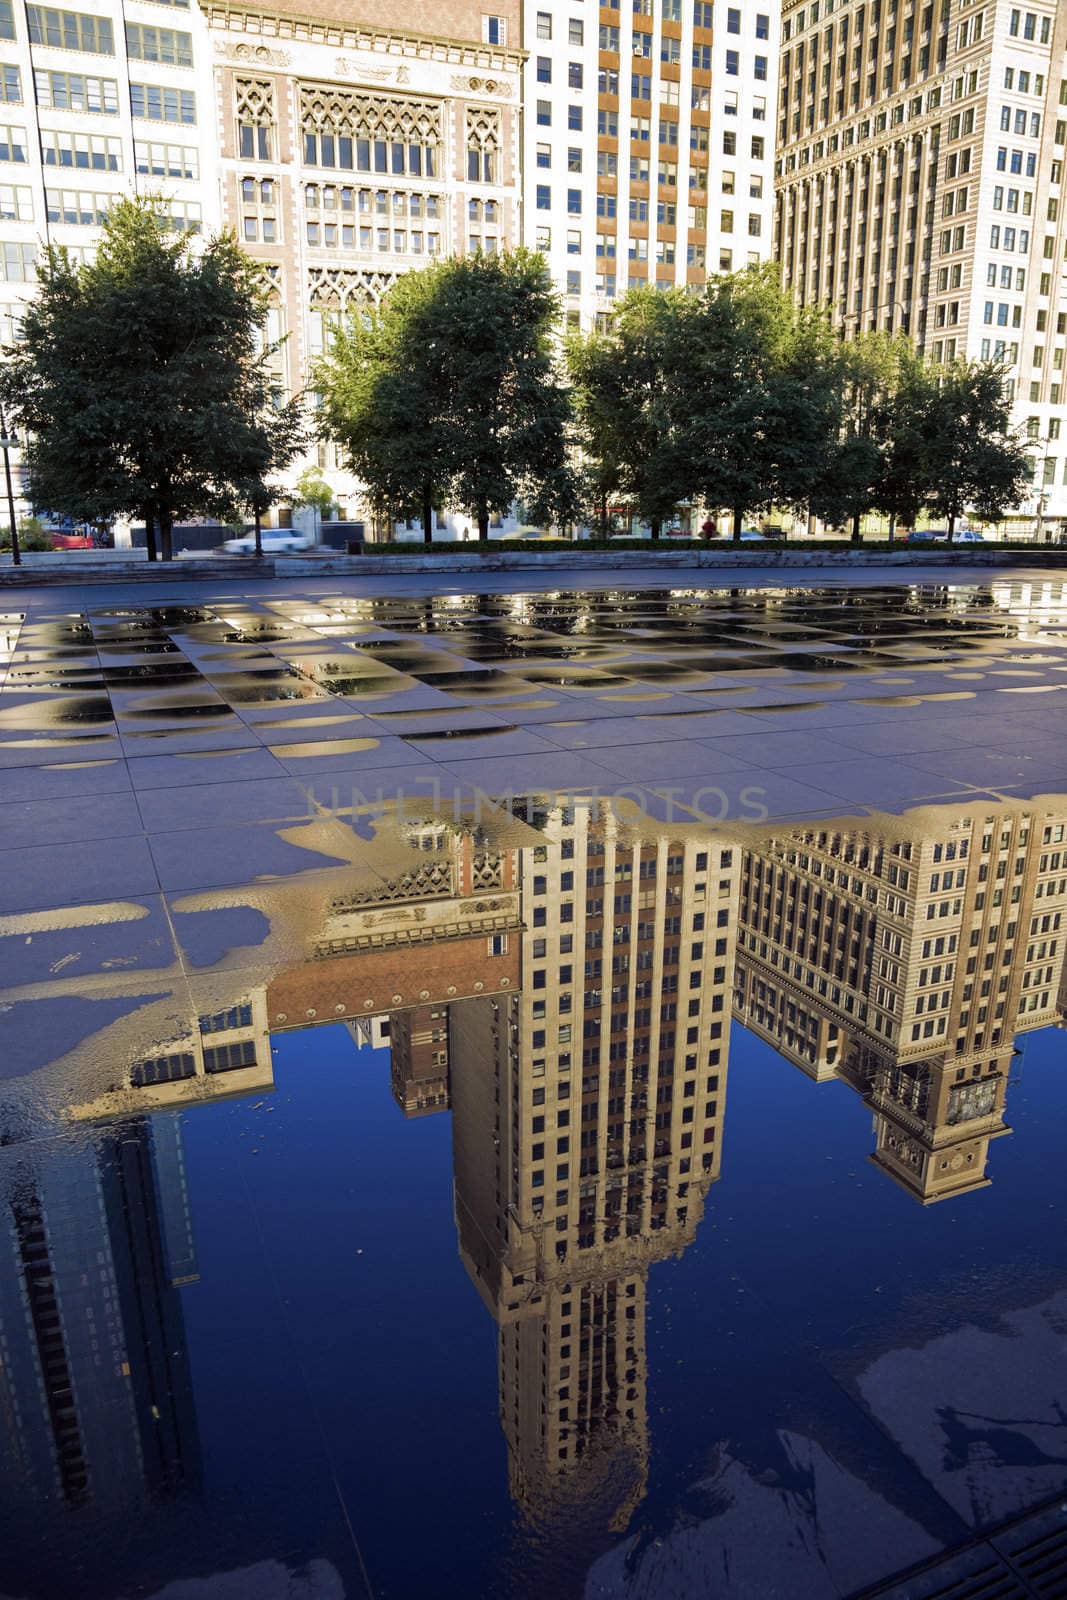 Reflection of Michigan Avenue buildings  by benkrut